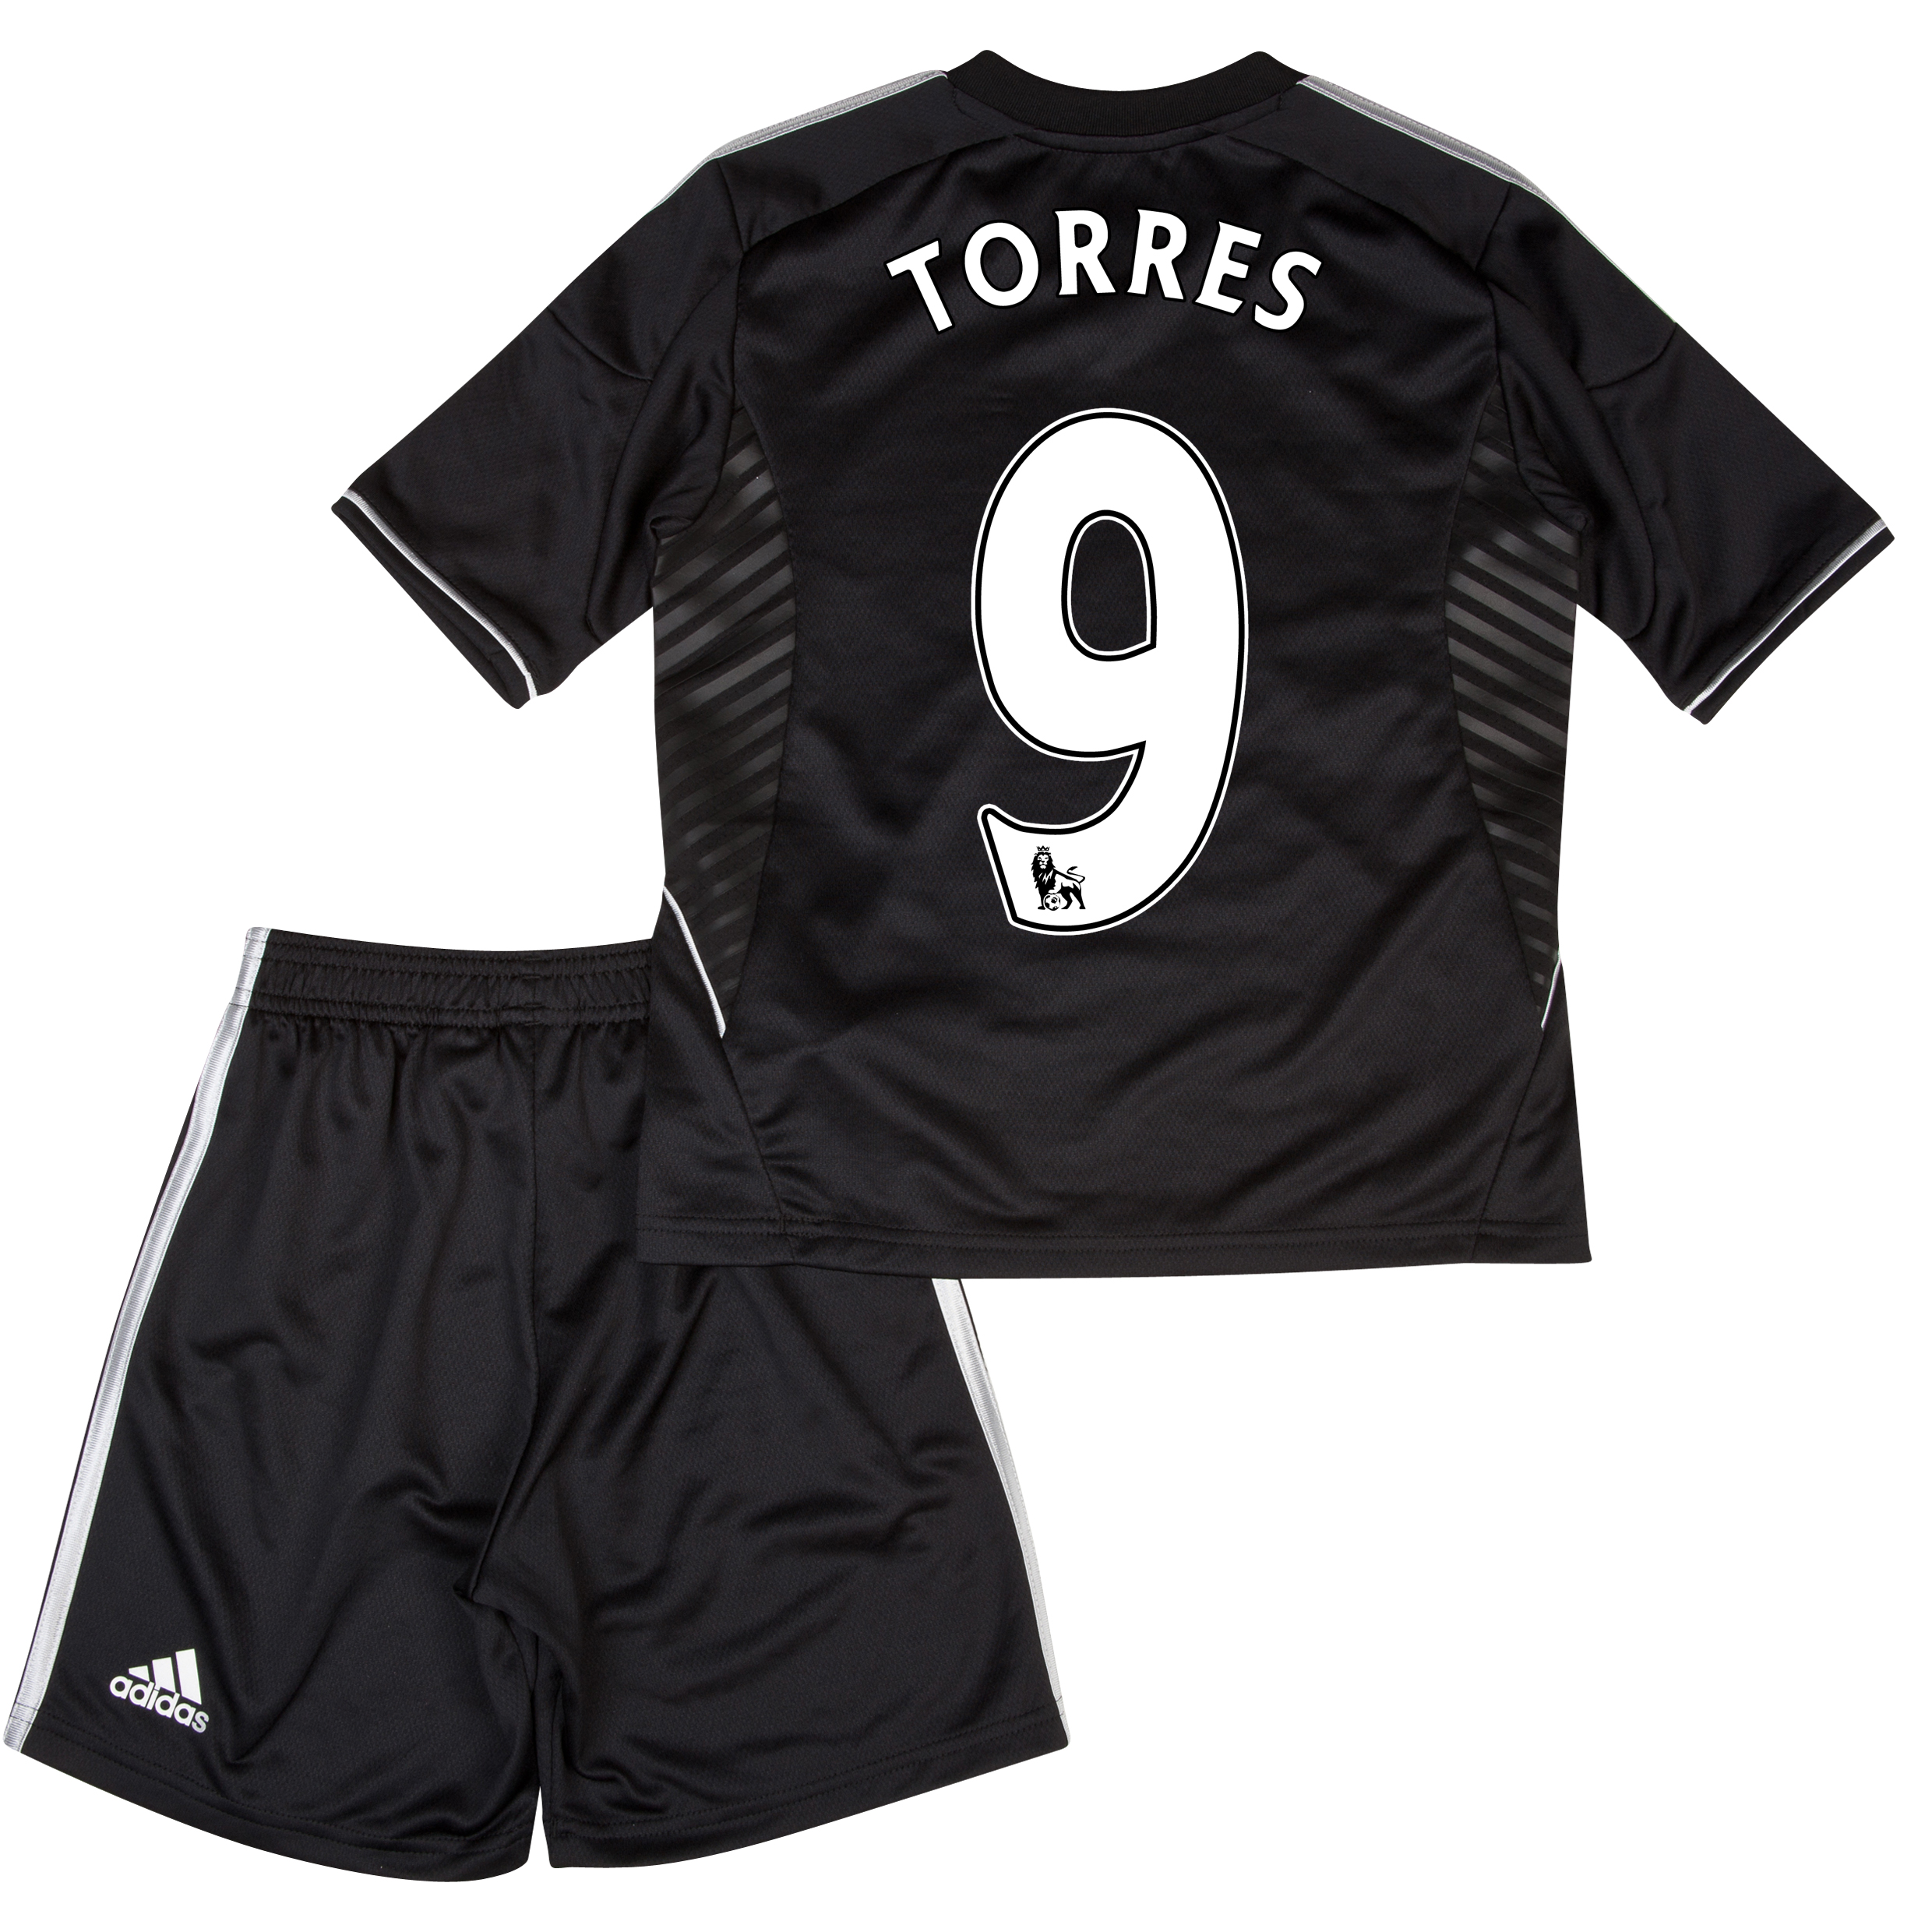 Chelsea Third Mini Kit 2013/14 with Torres 9 printing